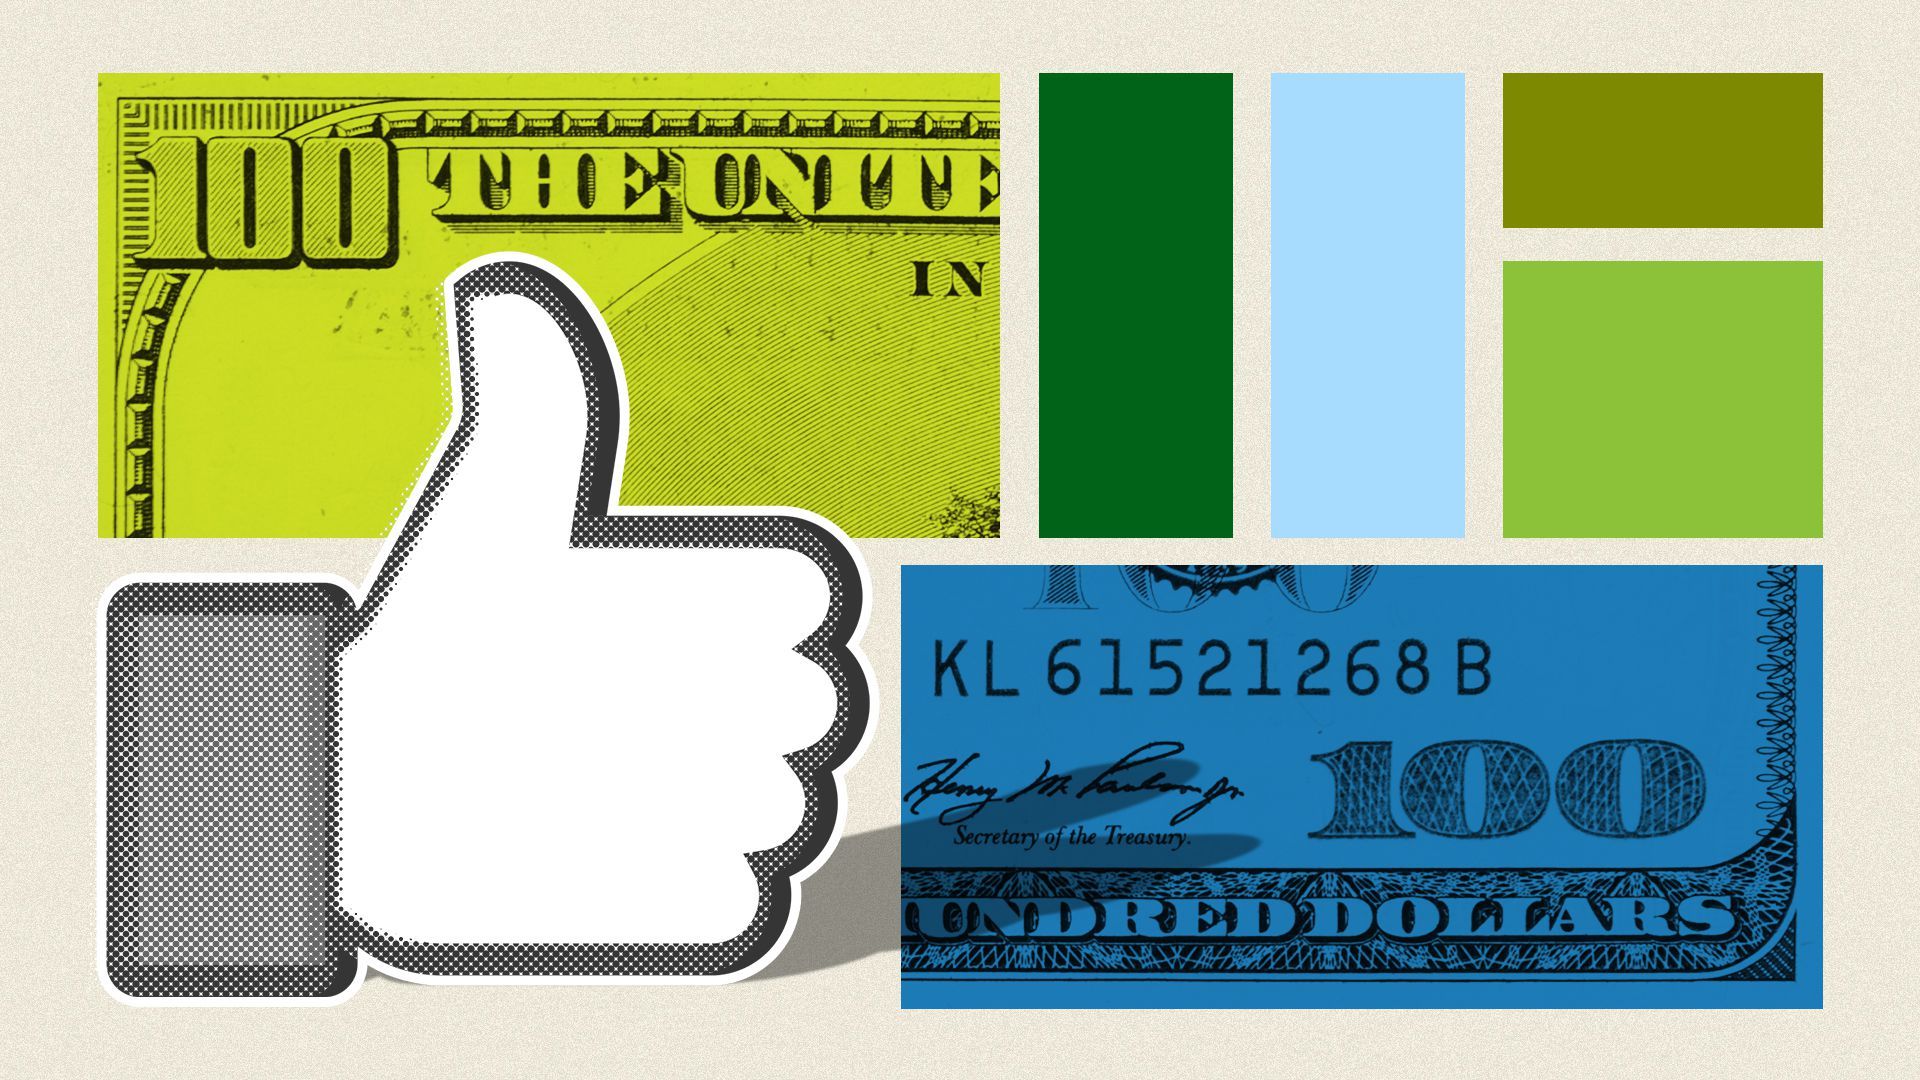 Illustrated collage of Facebook’s like button and dollar bills.